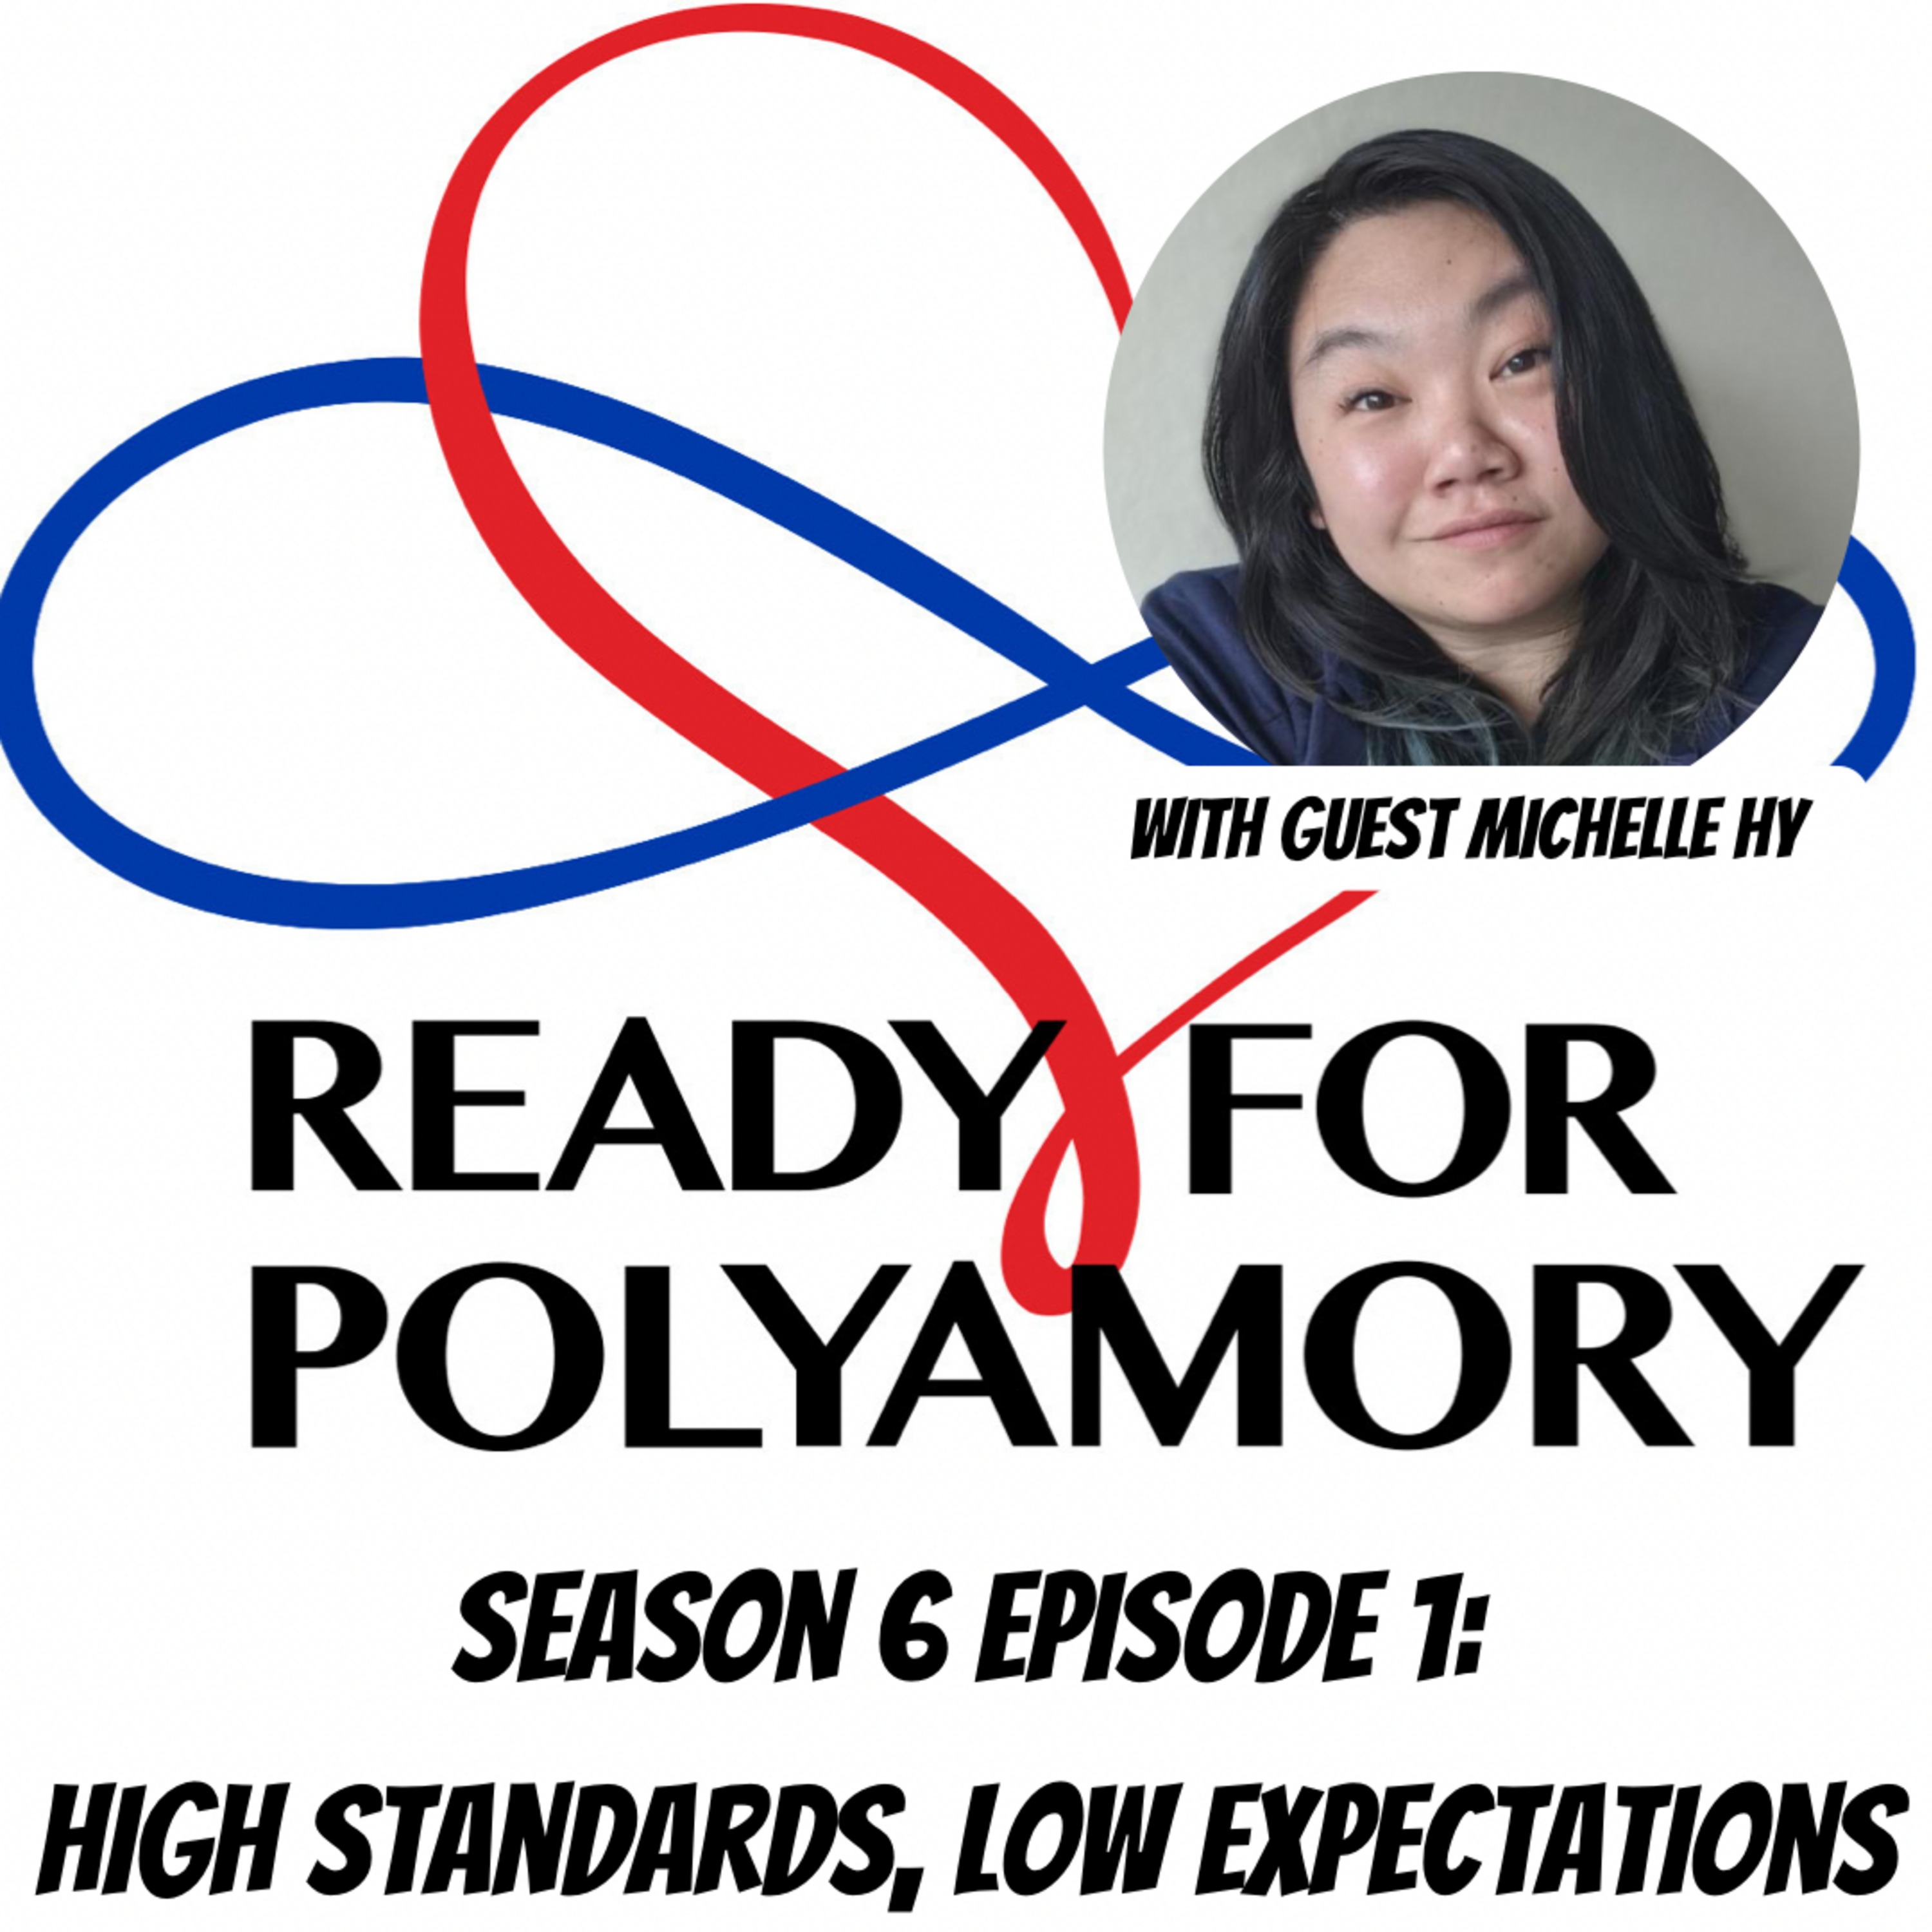 Season 6 Episode 1: High Standards and Low Expectations